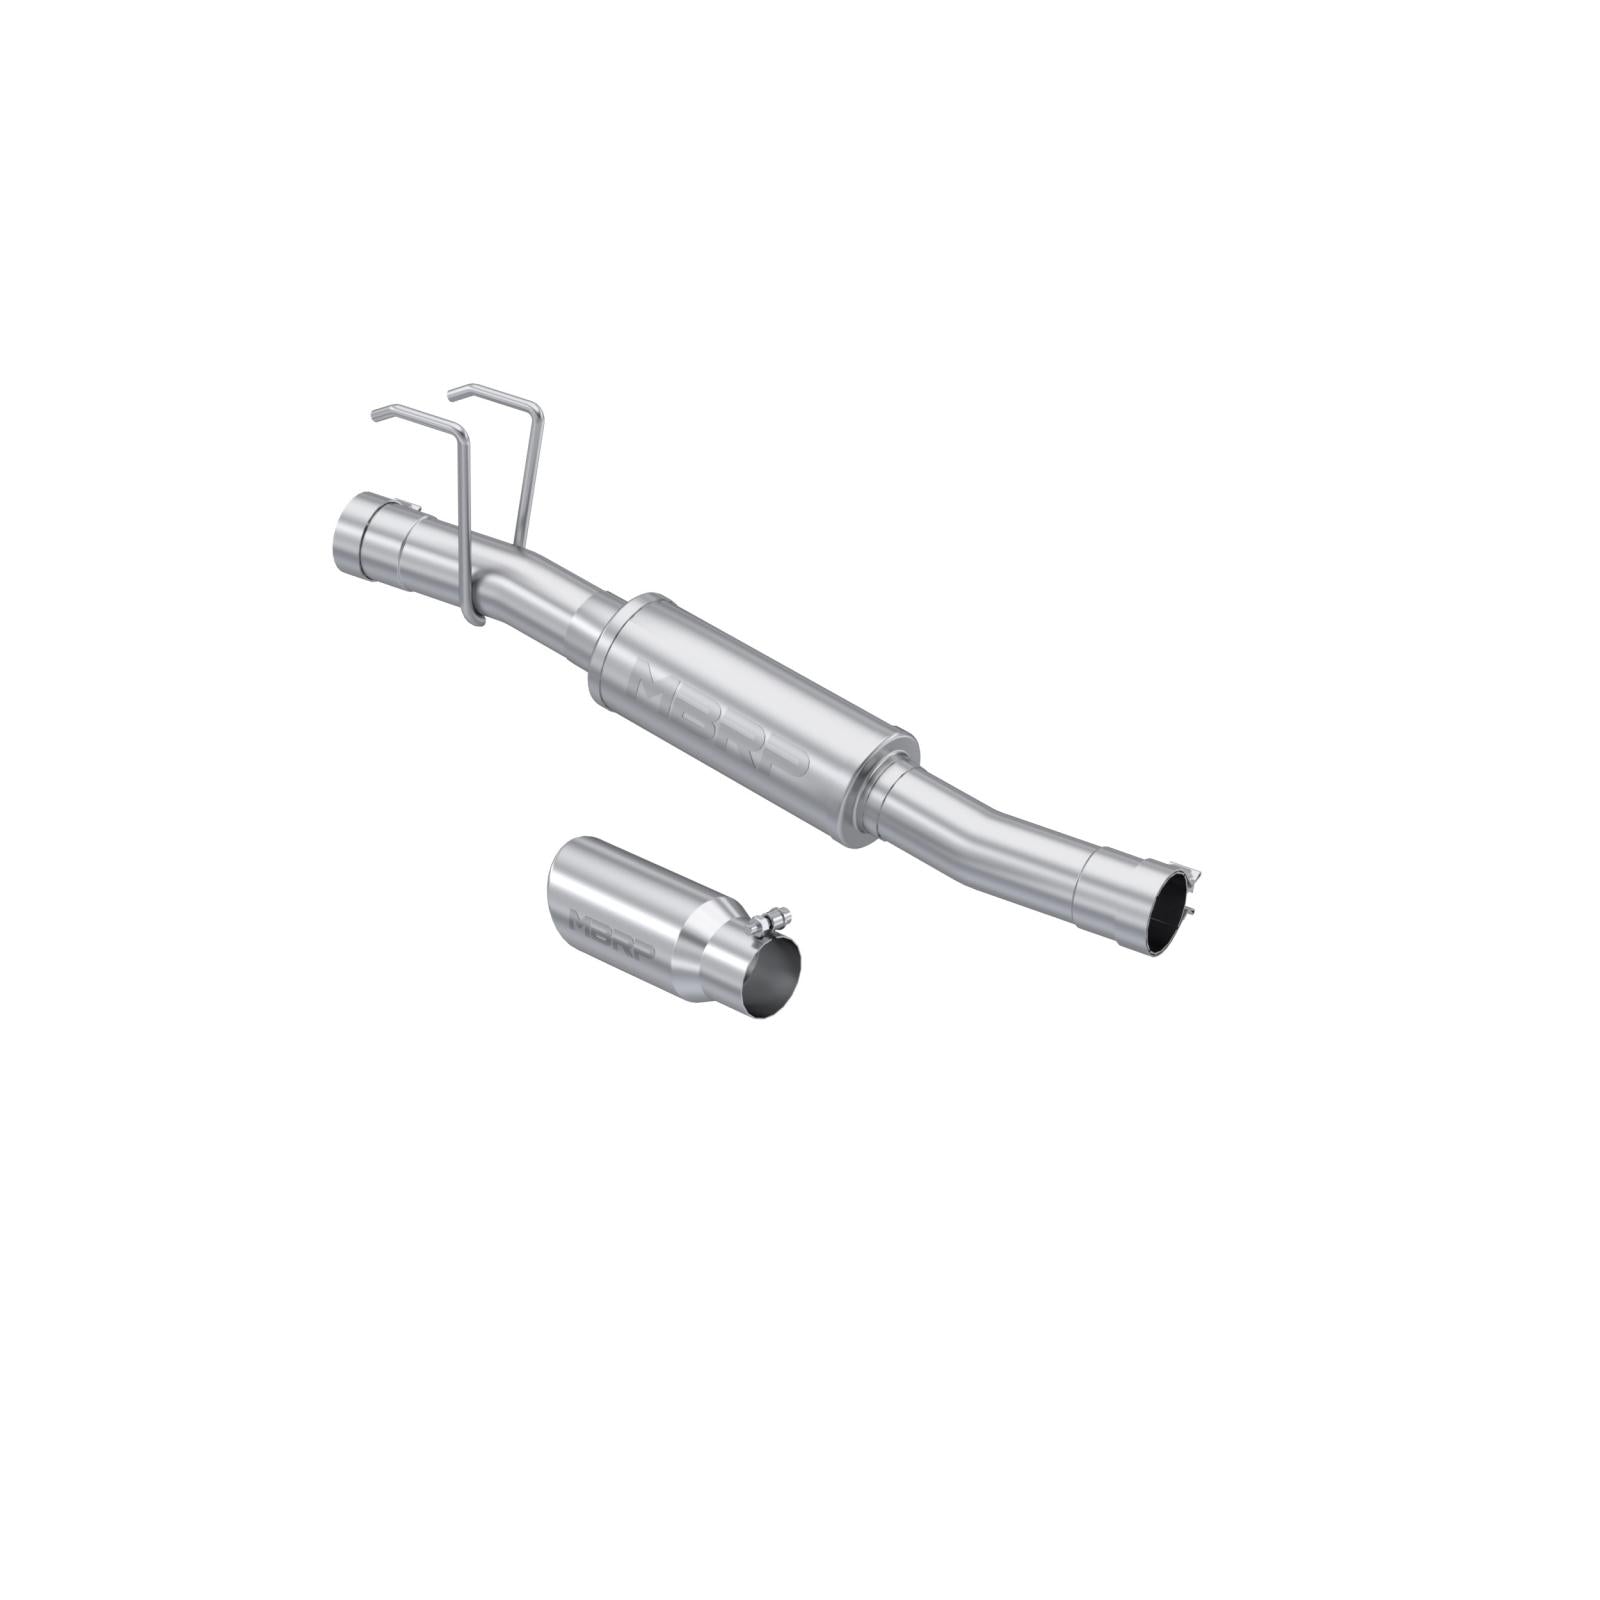 MBRP Exhaust Dodge and Ram 1500/ 1500 Classic 3.6L/3.7L/4.7L/5.7L T409SS 3 Inch Muffler Replacement with 4 Inch OD Tip MBRP S5101409